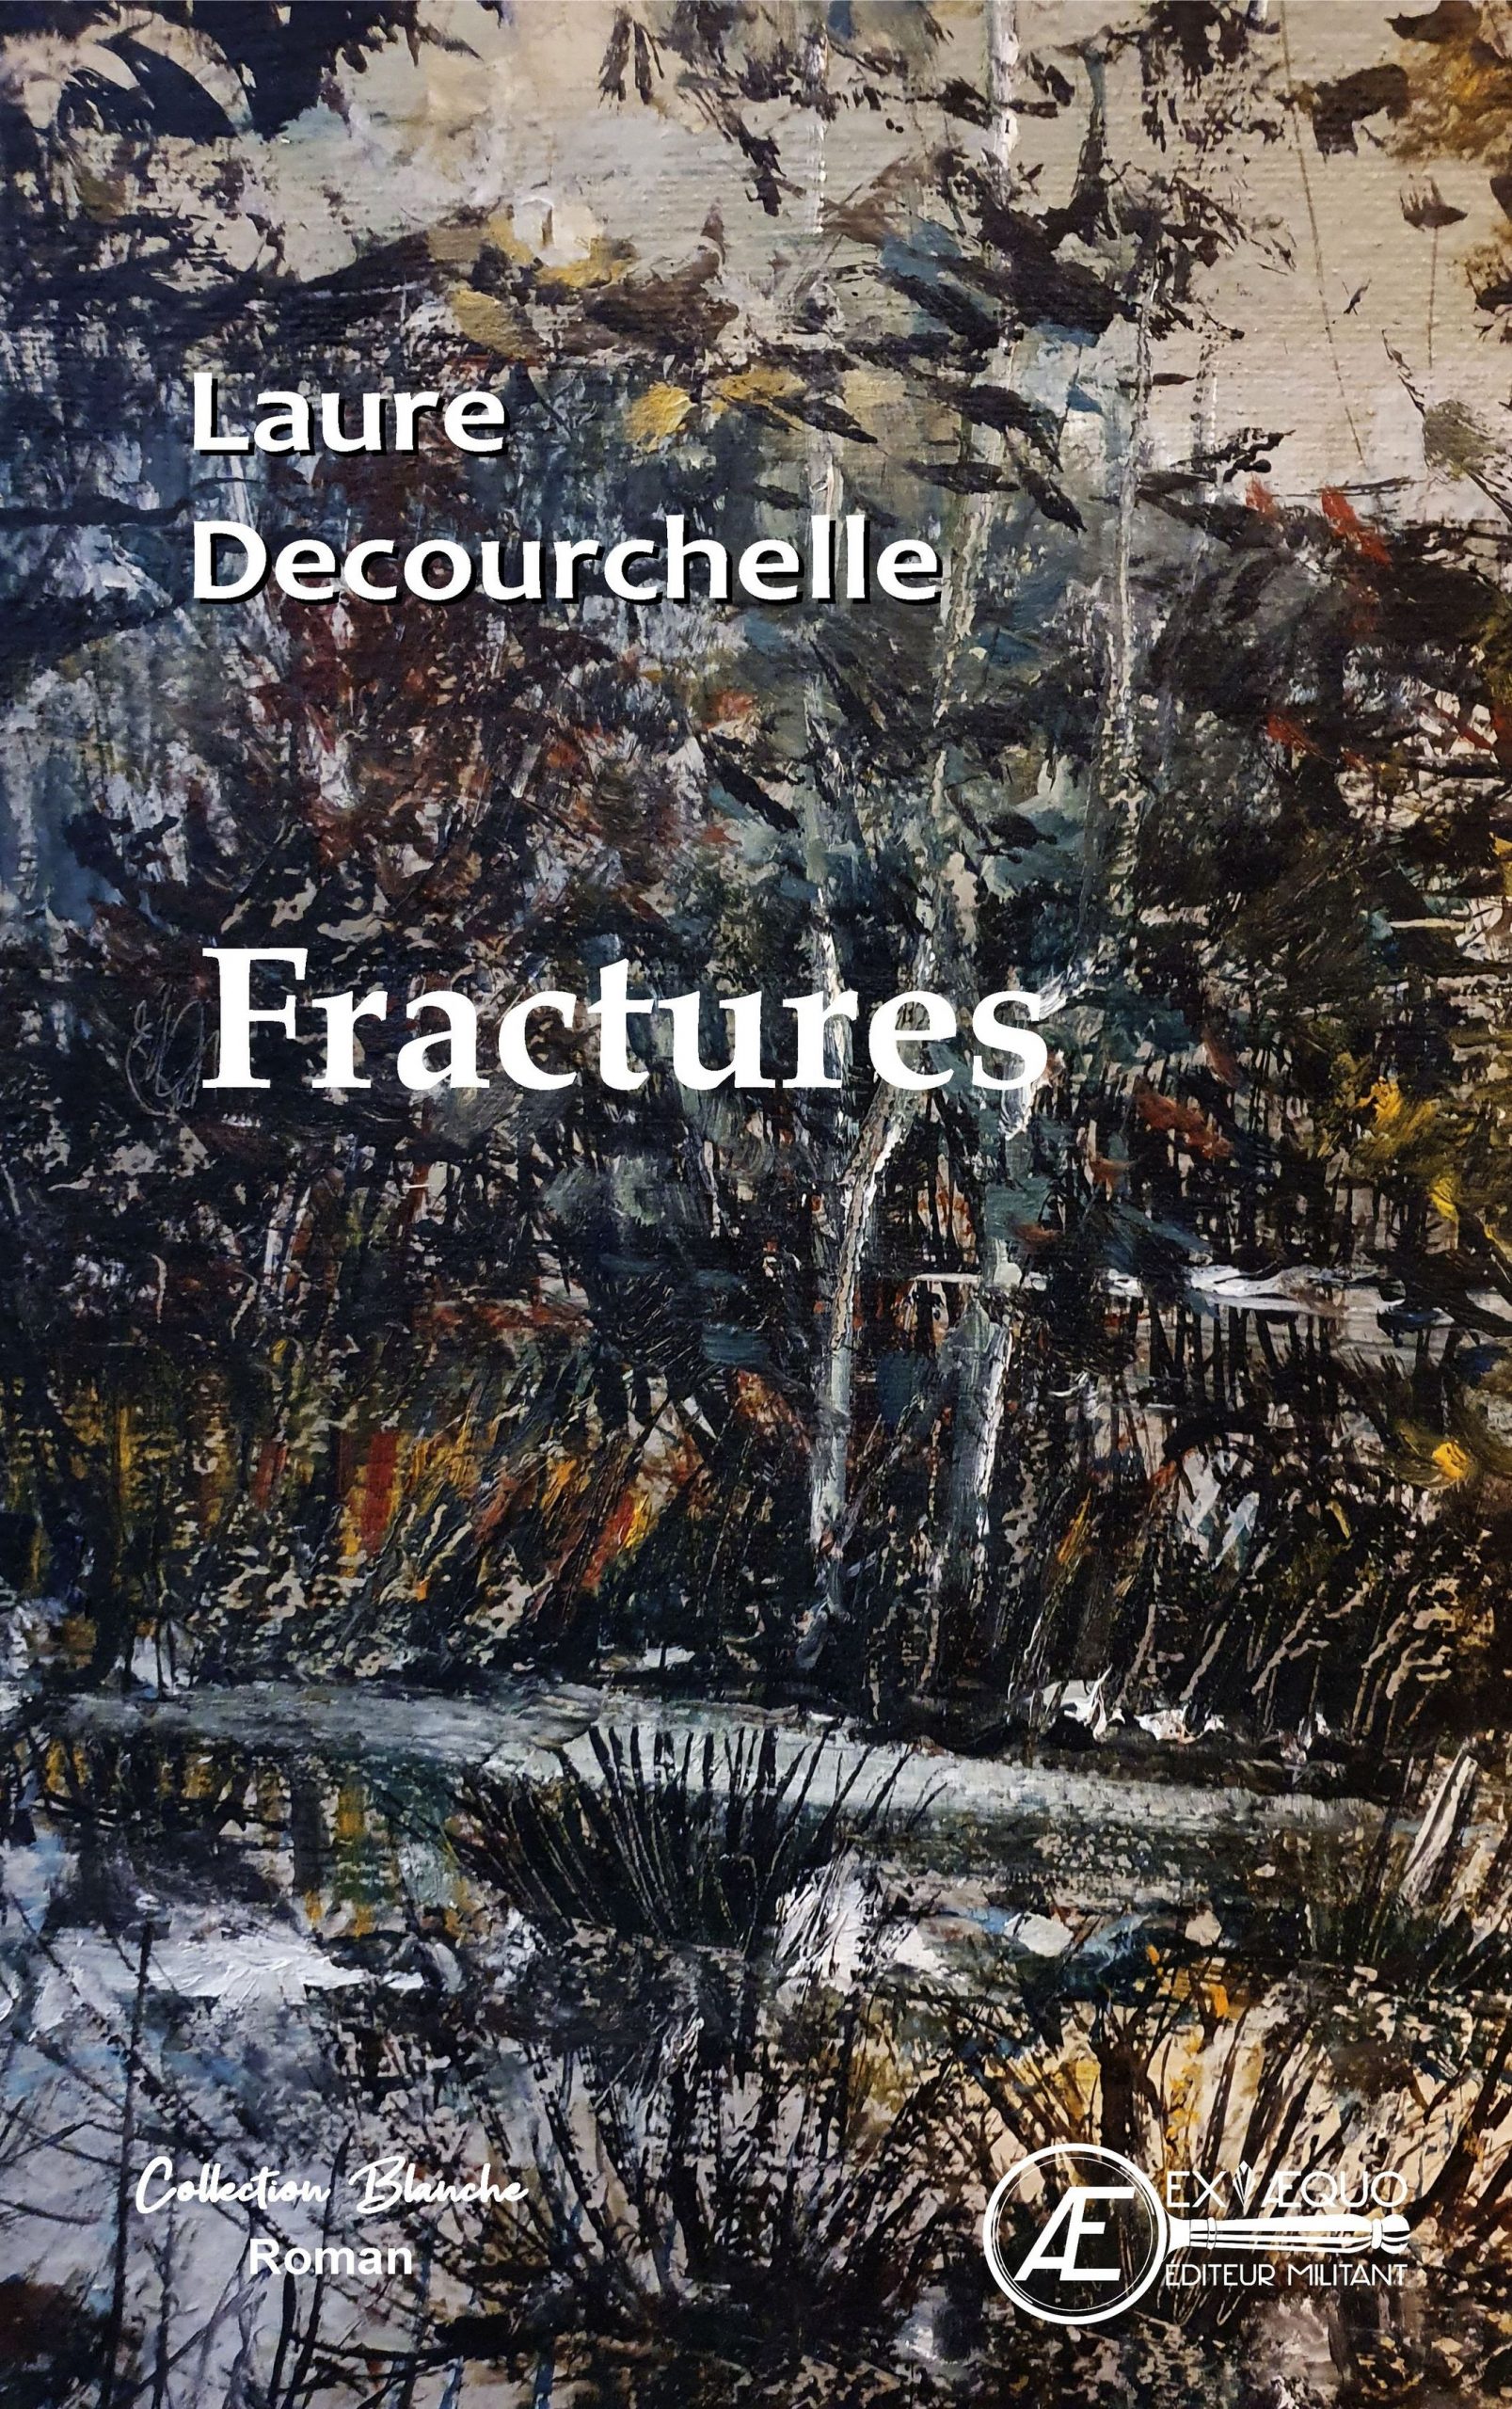 You are currently viewing Fractures, de Laure Decourchelle